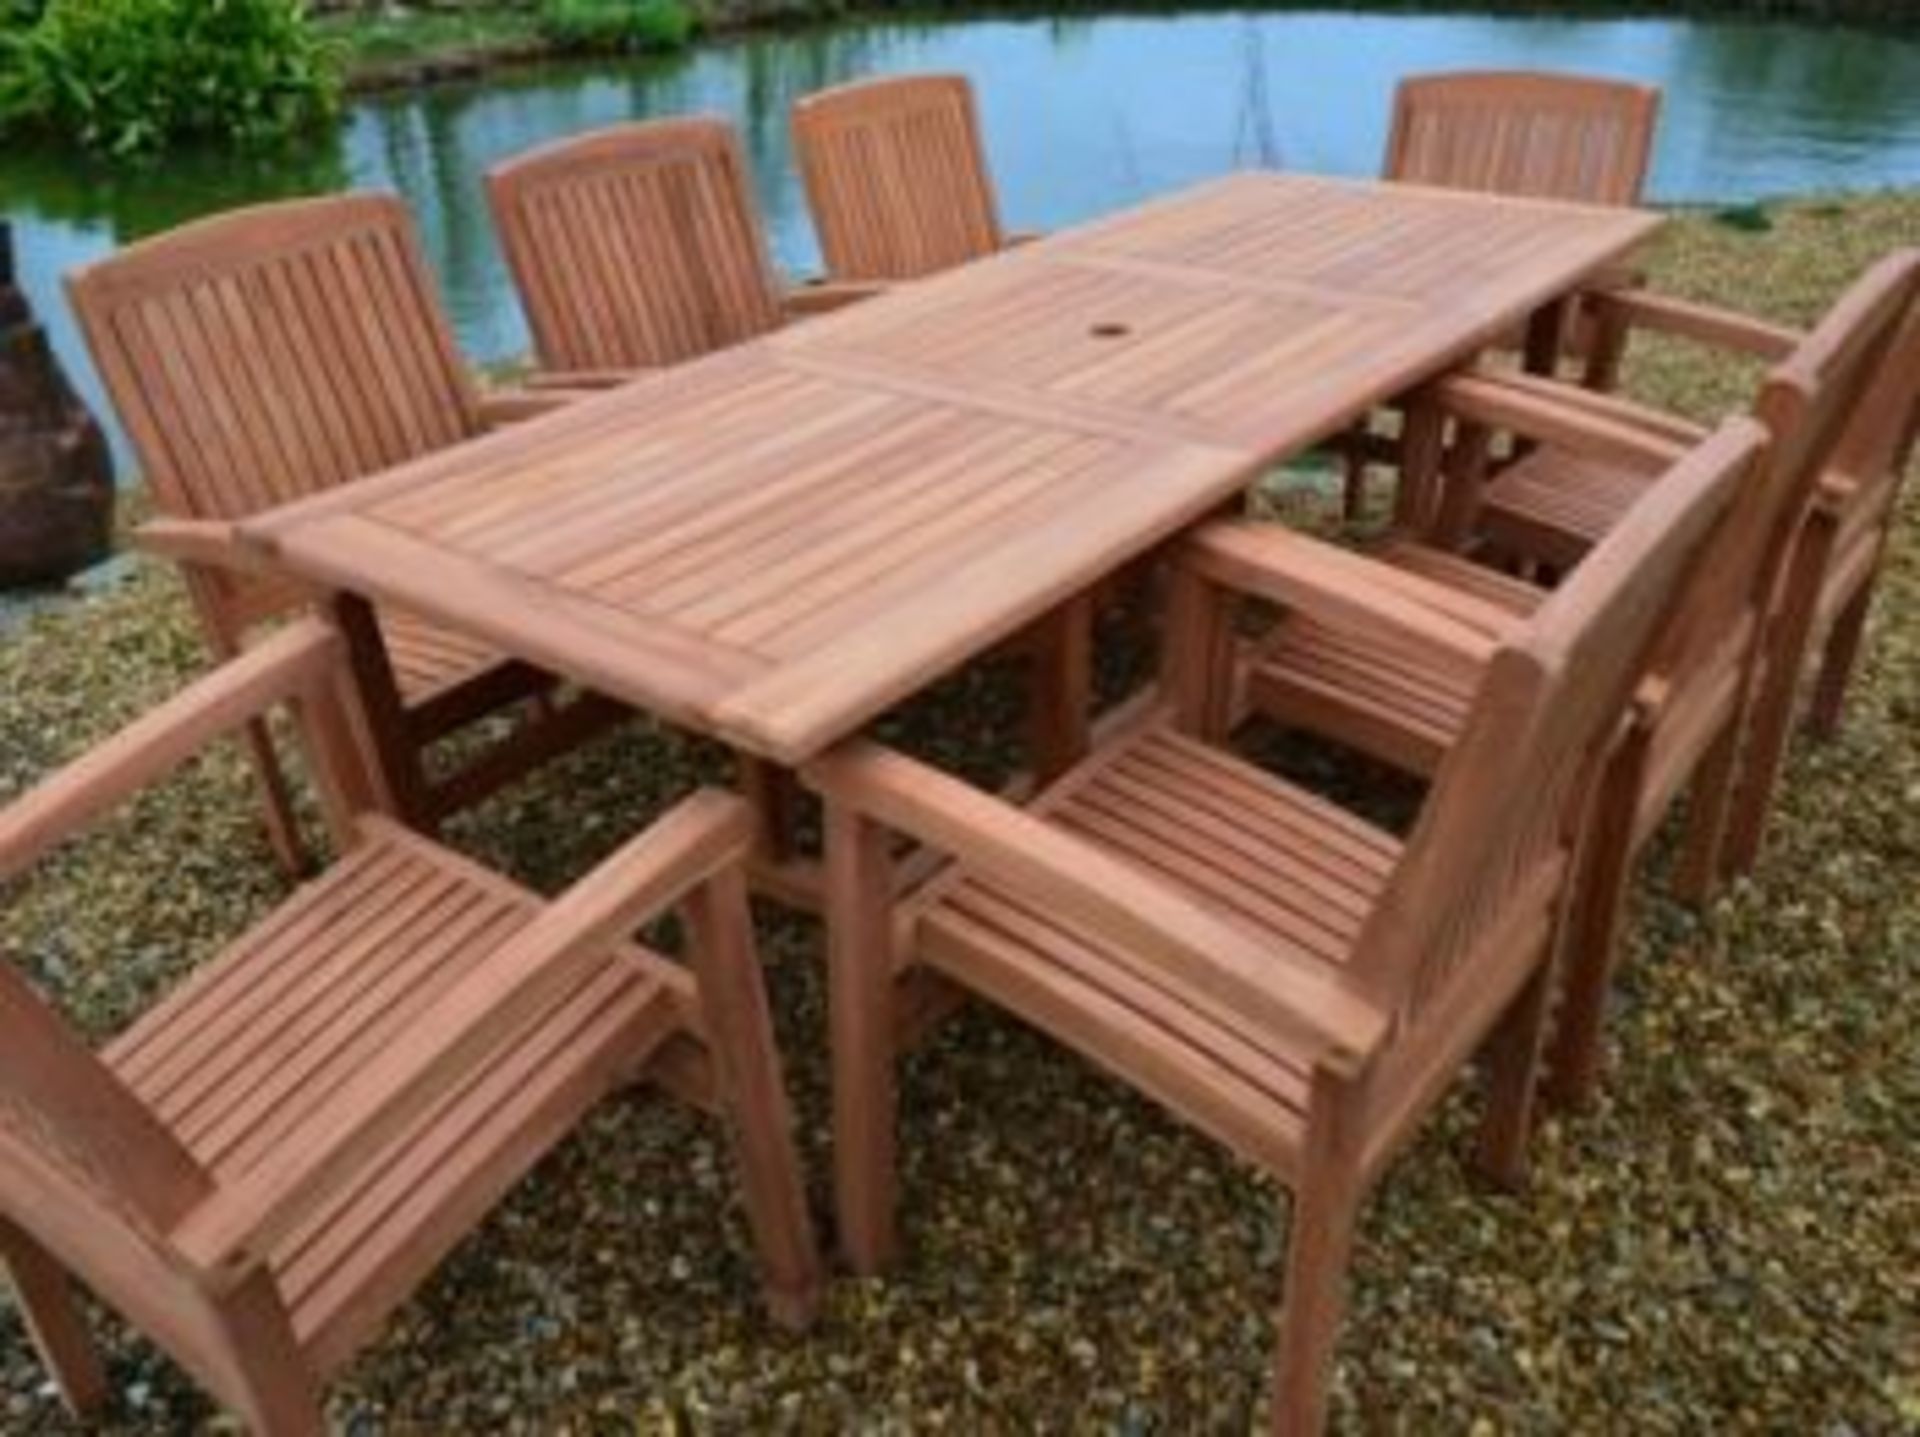 V Brand New Teak Extended Rectangle Table Set Allows For Up To 8 People including 8 stacking